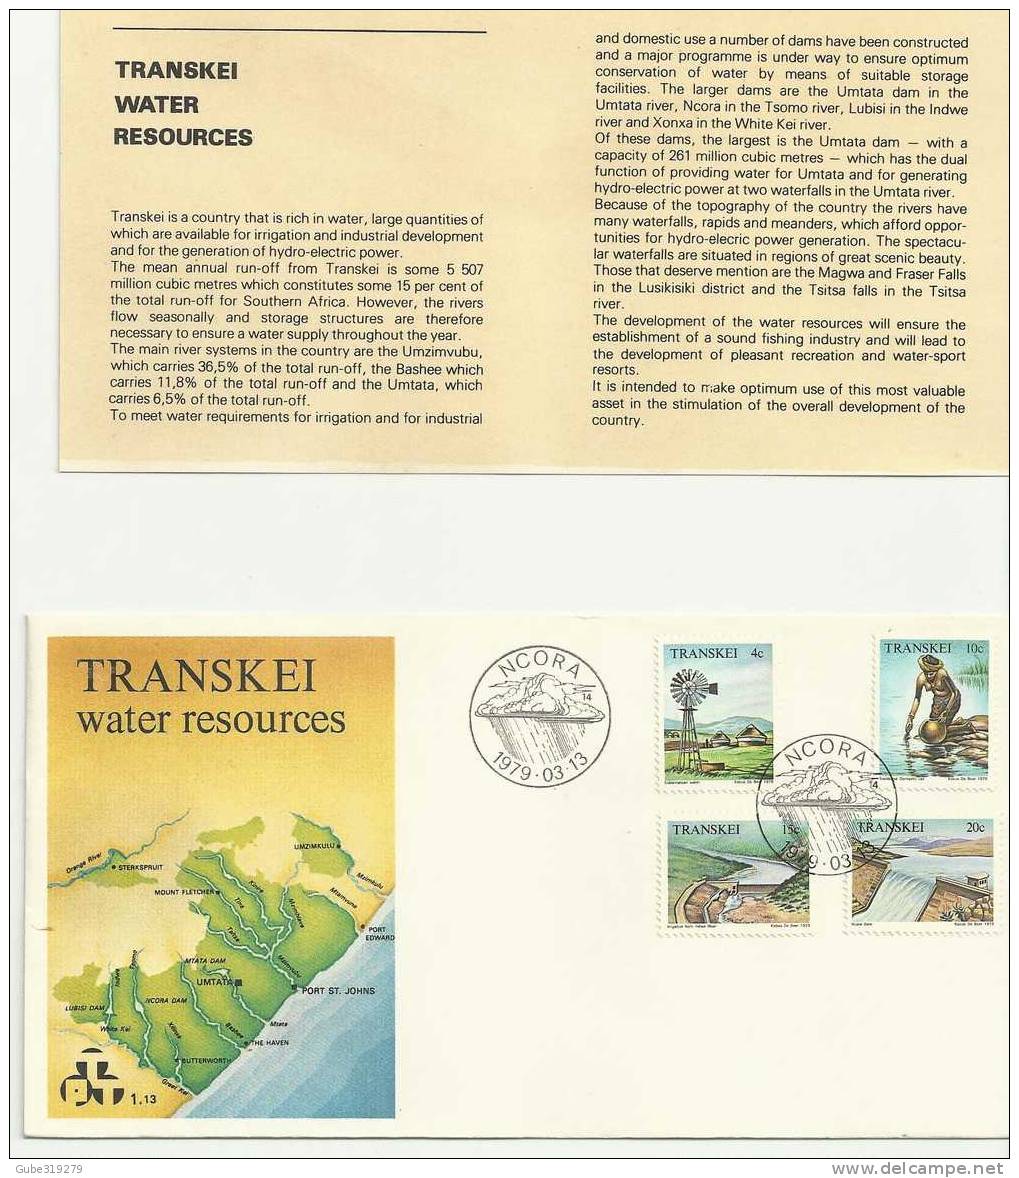 TRANSKEI -1979 - FDC - TRANSKEI WATER RESOURCES - WITH 4 STAMPS & INSIDE EXPLANATORY CARD - Transkei